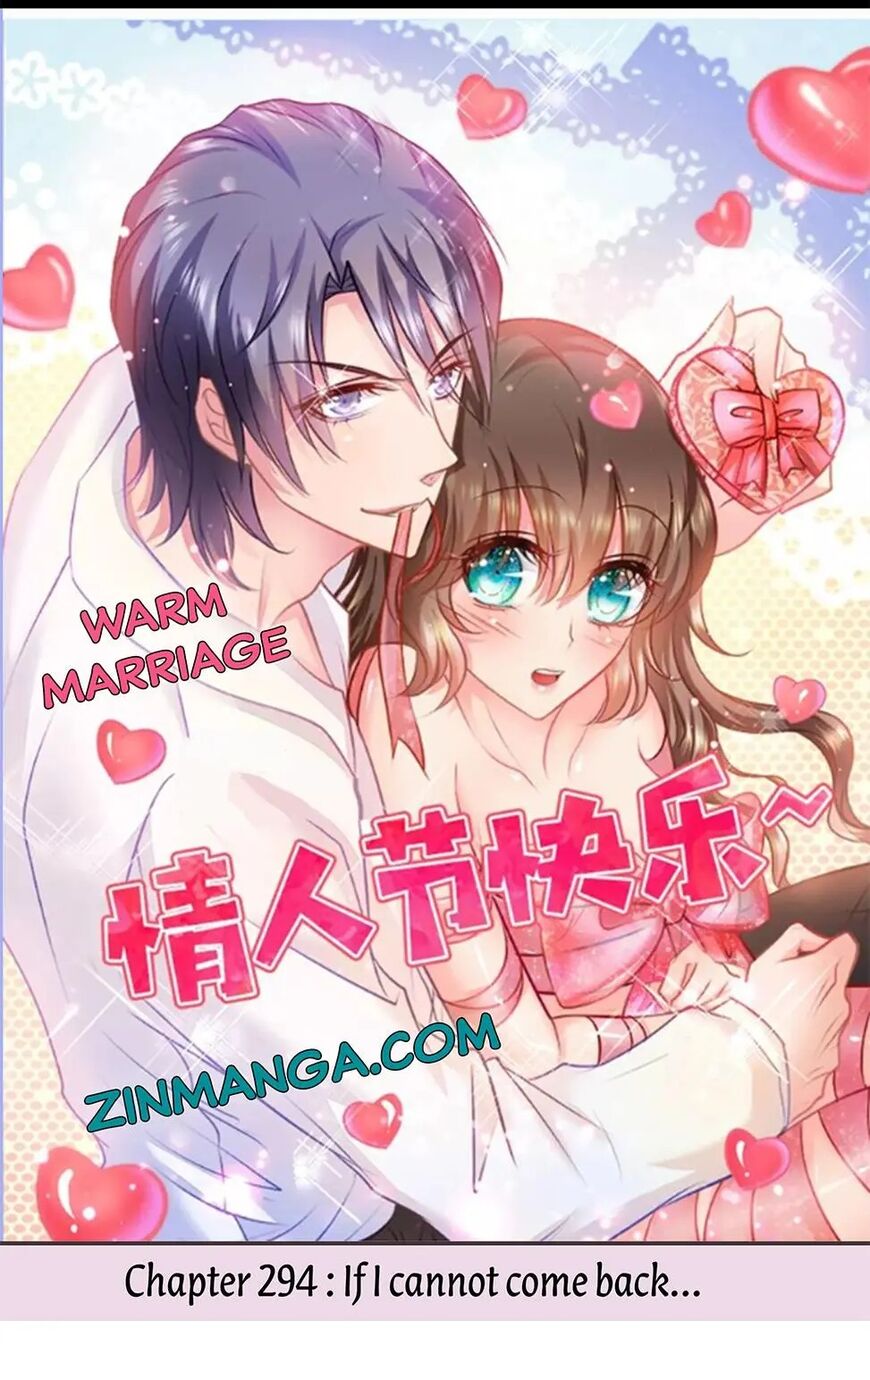 Into the Bones of Warm Marriage ch.294